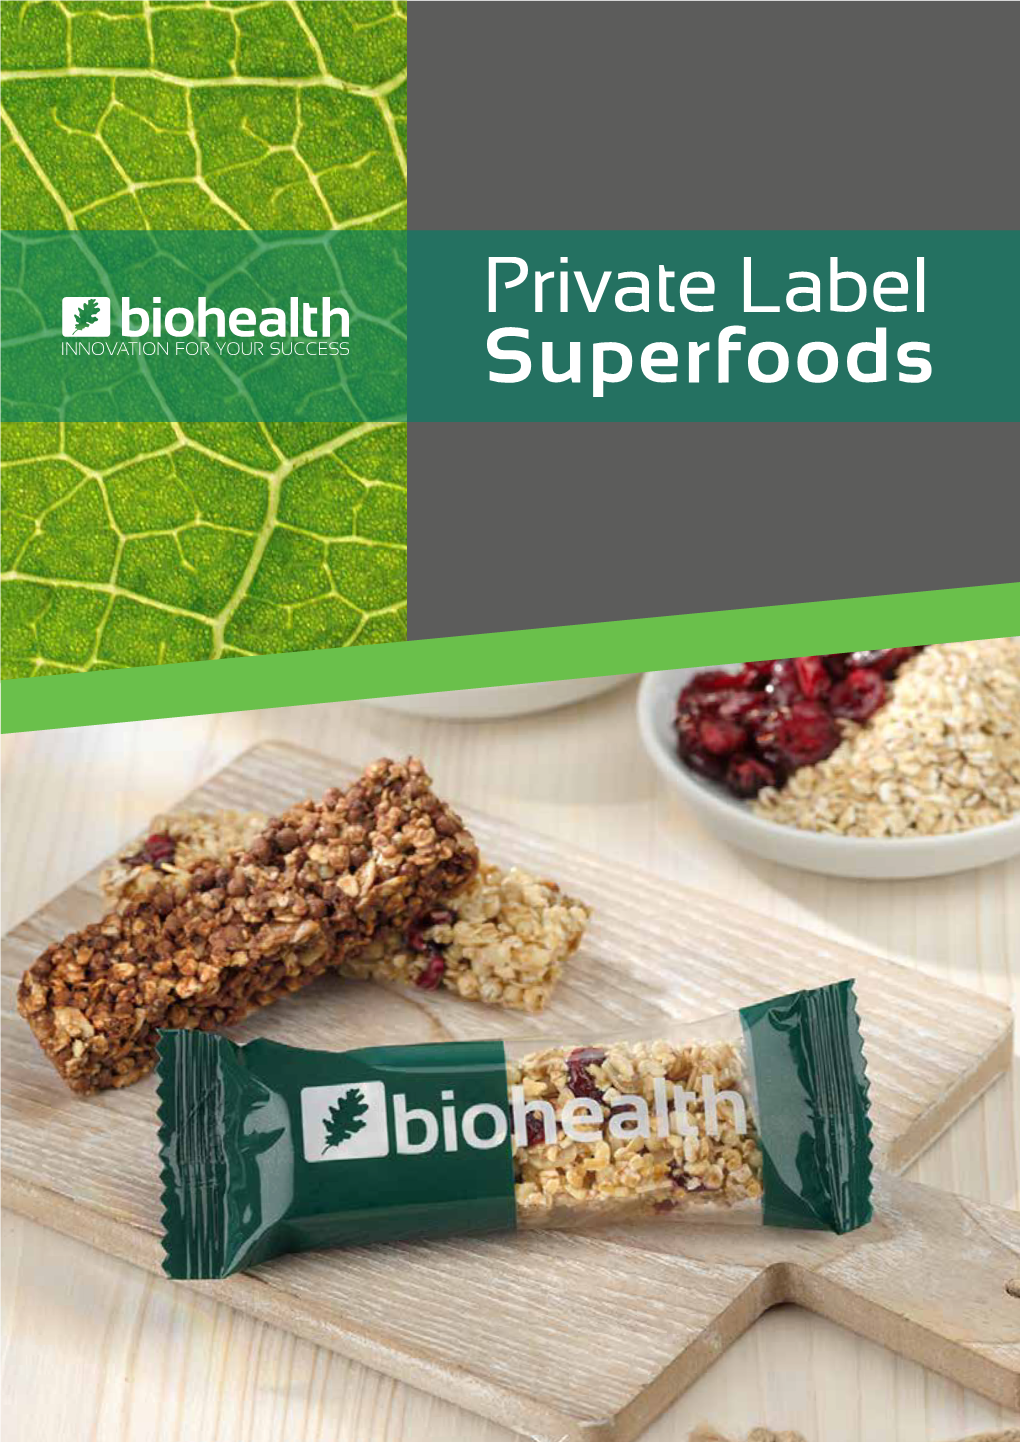 Private Label Superfoods Biohealth 2